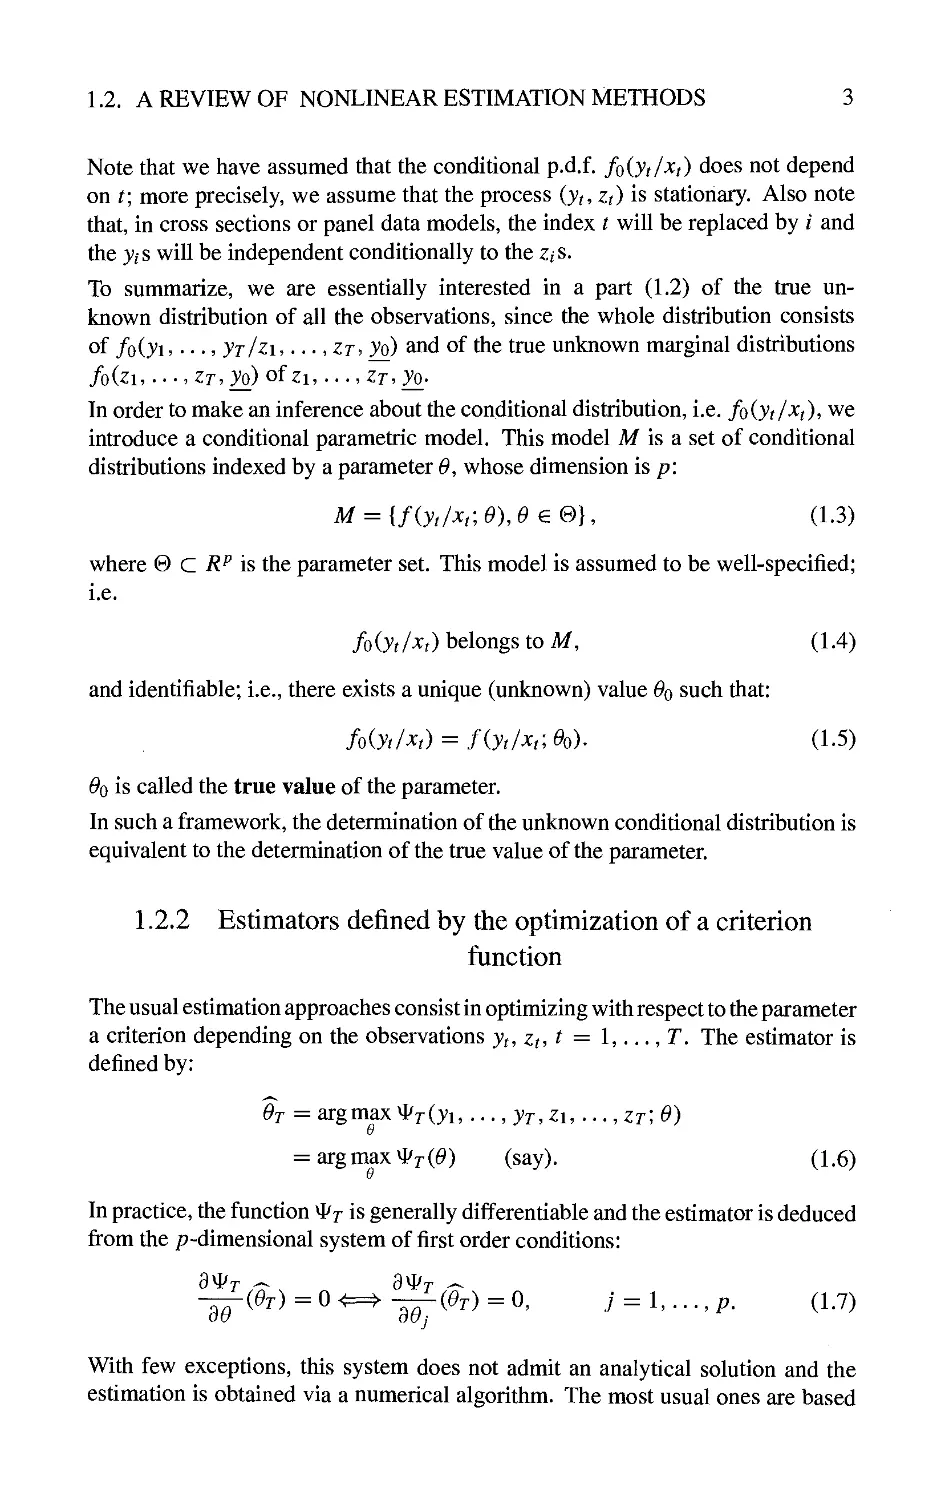 1.2.2 Estimators defined by the optimization of a criterion function